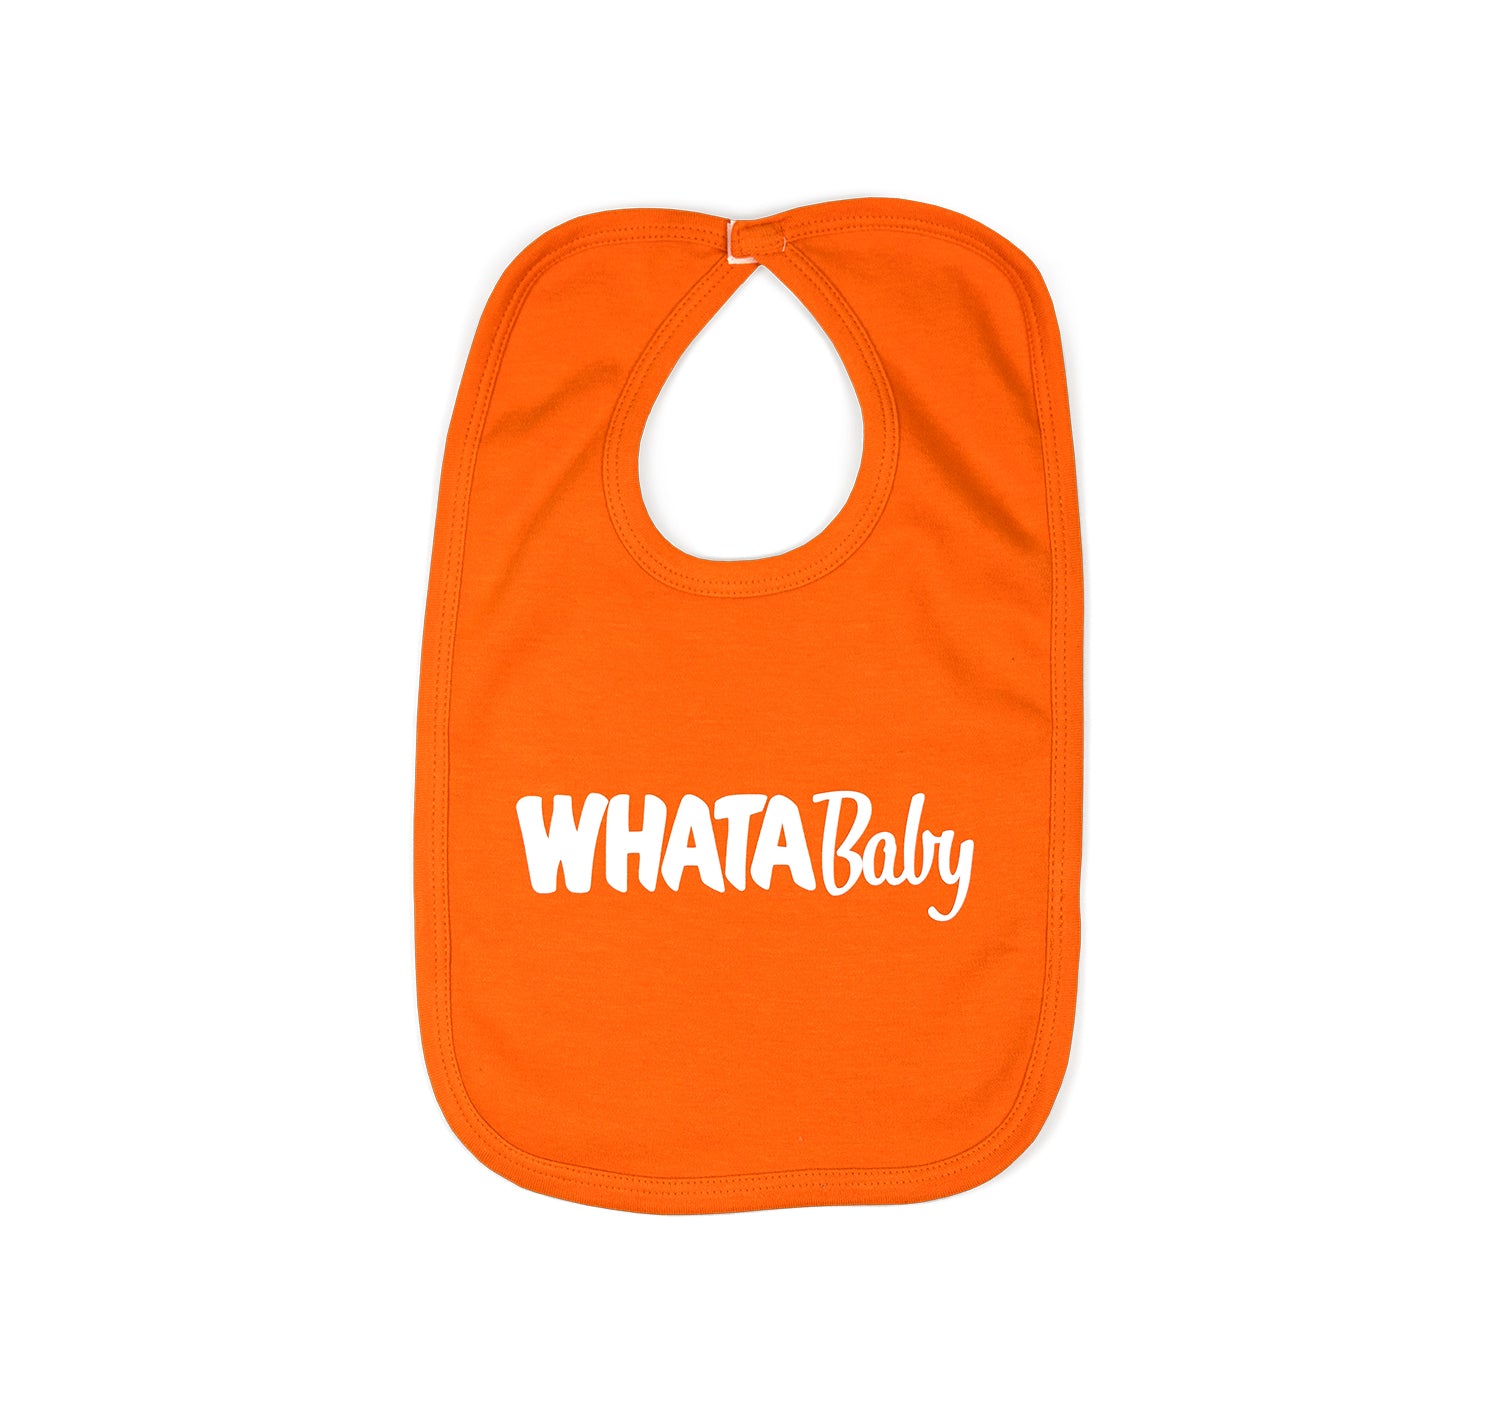 Best Selling Shopify Products on shop.whataburger.com-4